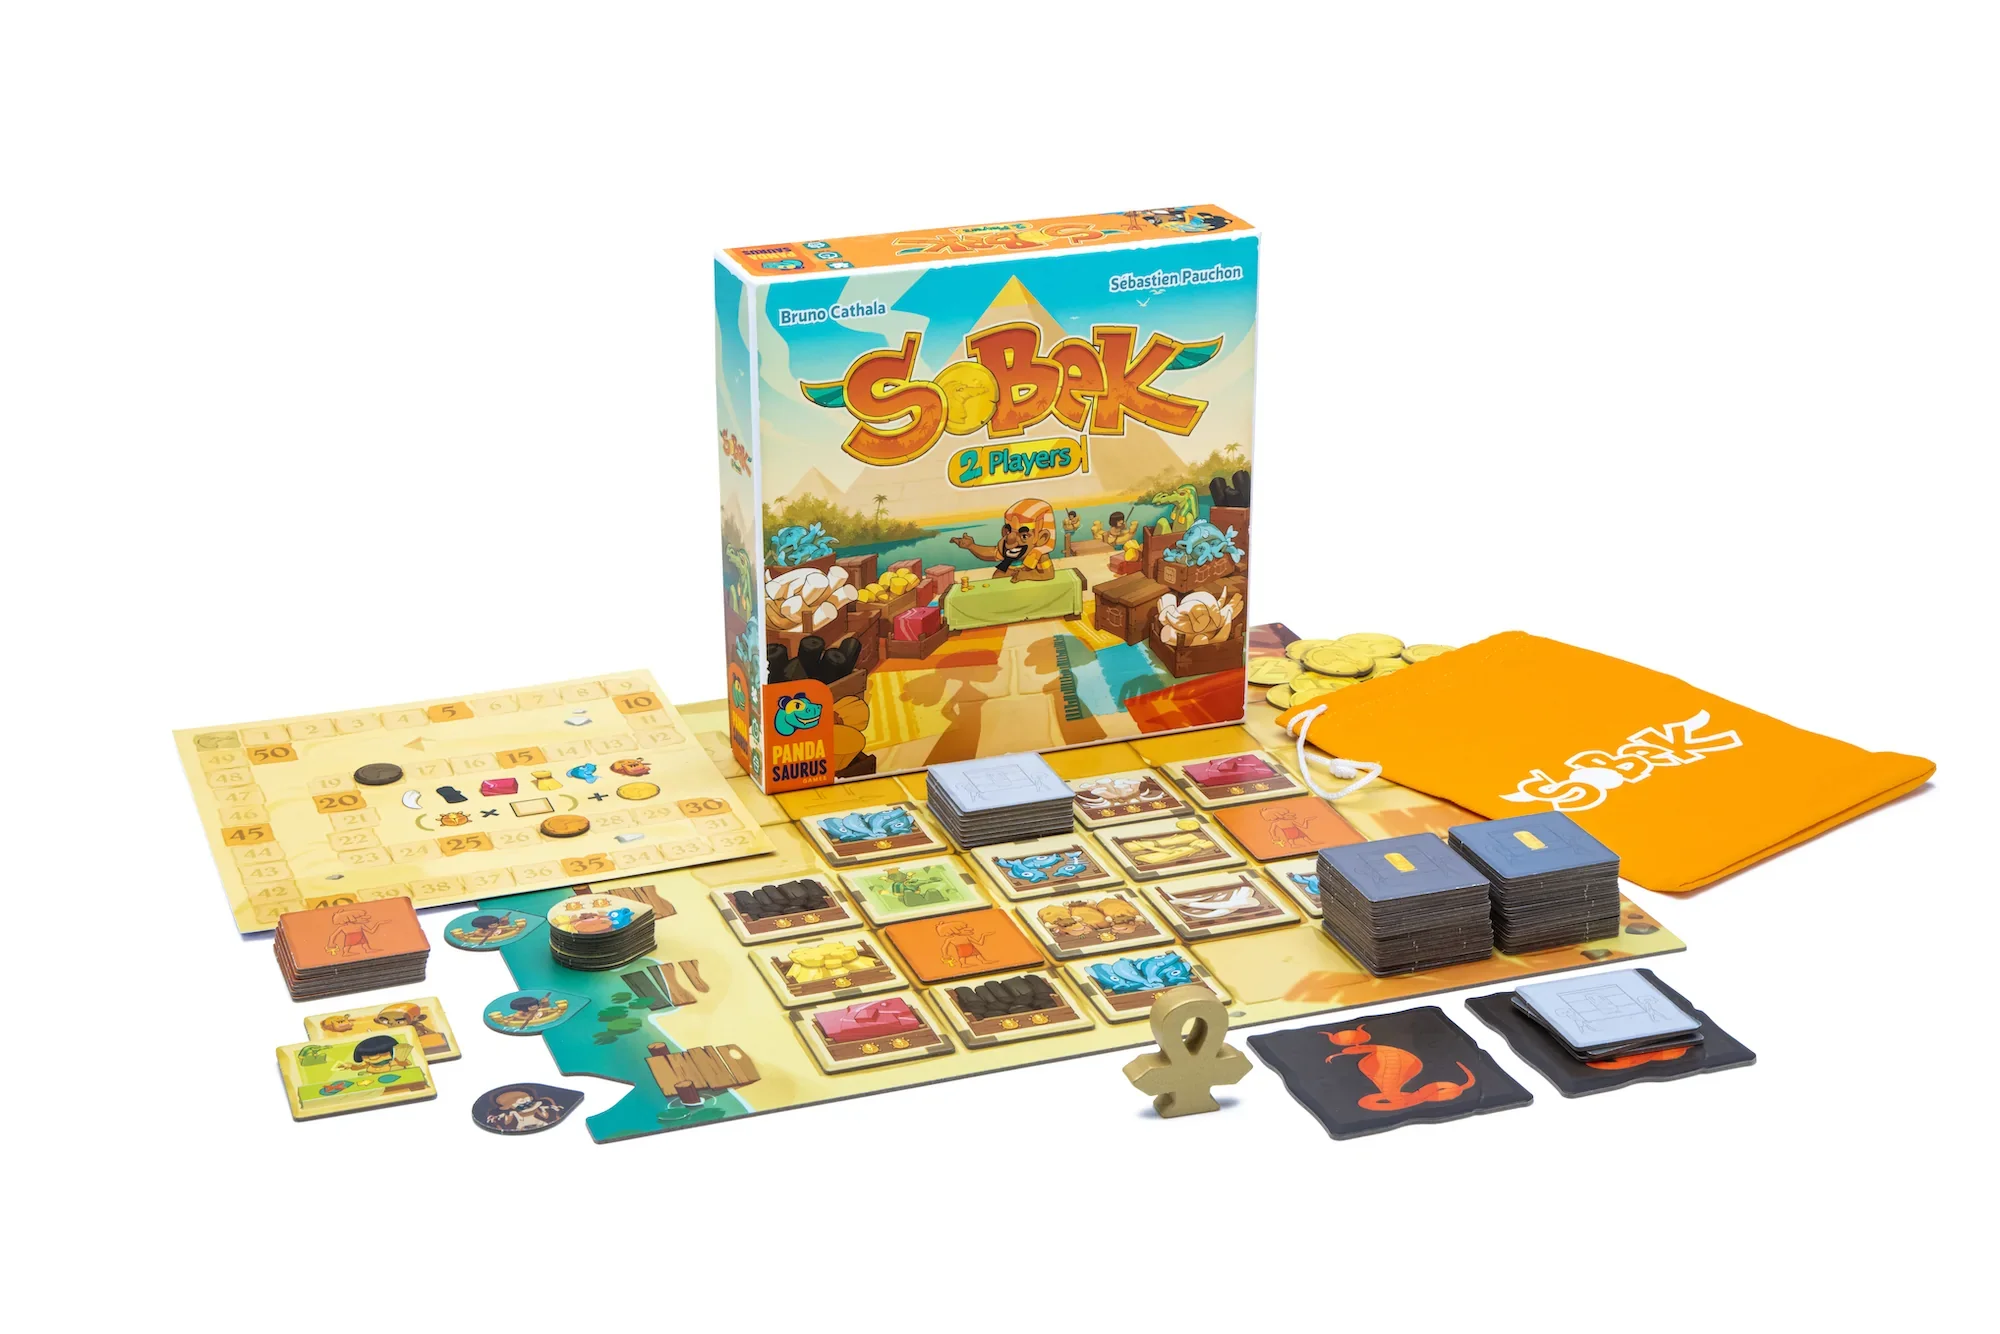 A wide shot of the Sobek: 2 Player board game, featuring the box, playing board,  icons, cards and so on. It's an Egyptian-themed game so the colours are sandy yellow.